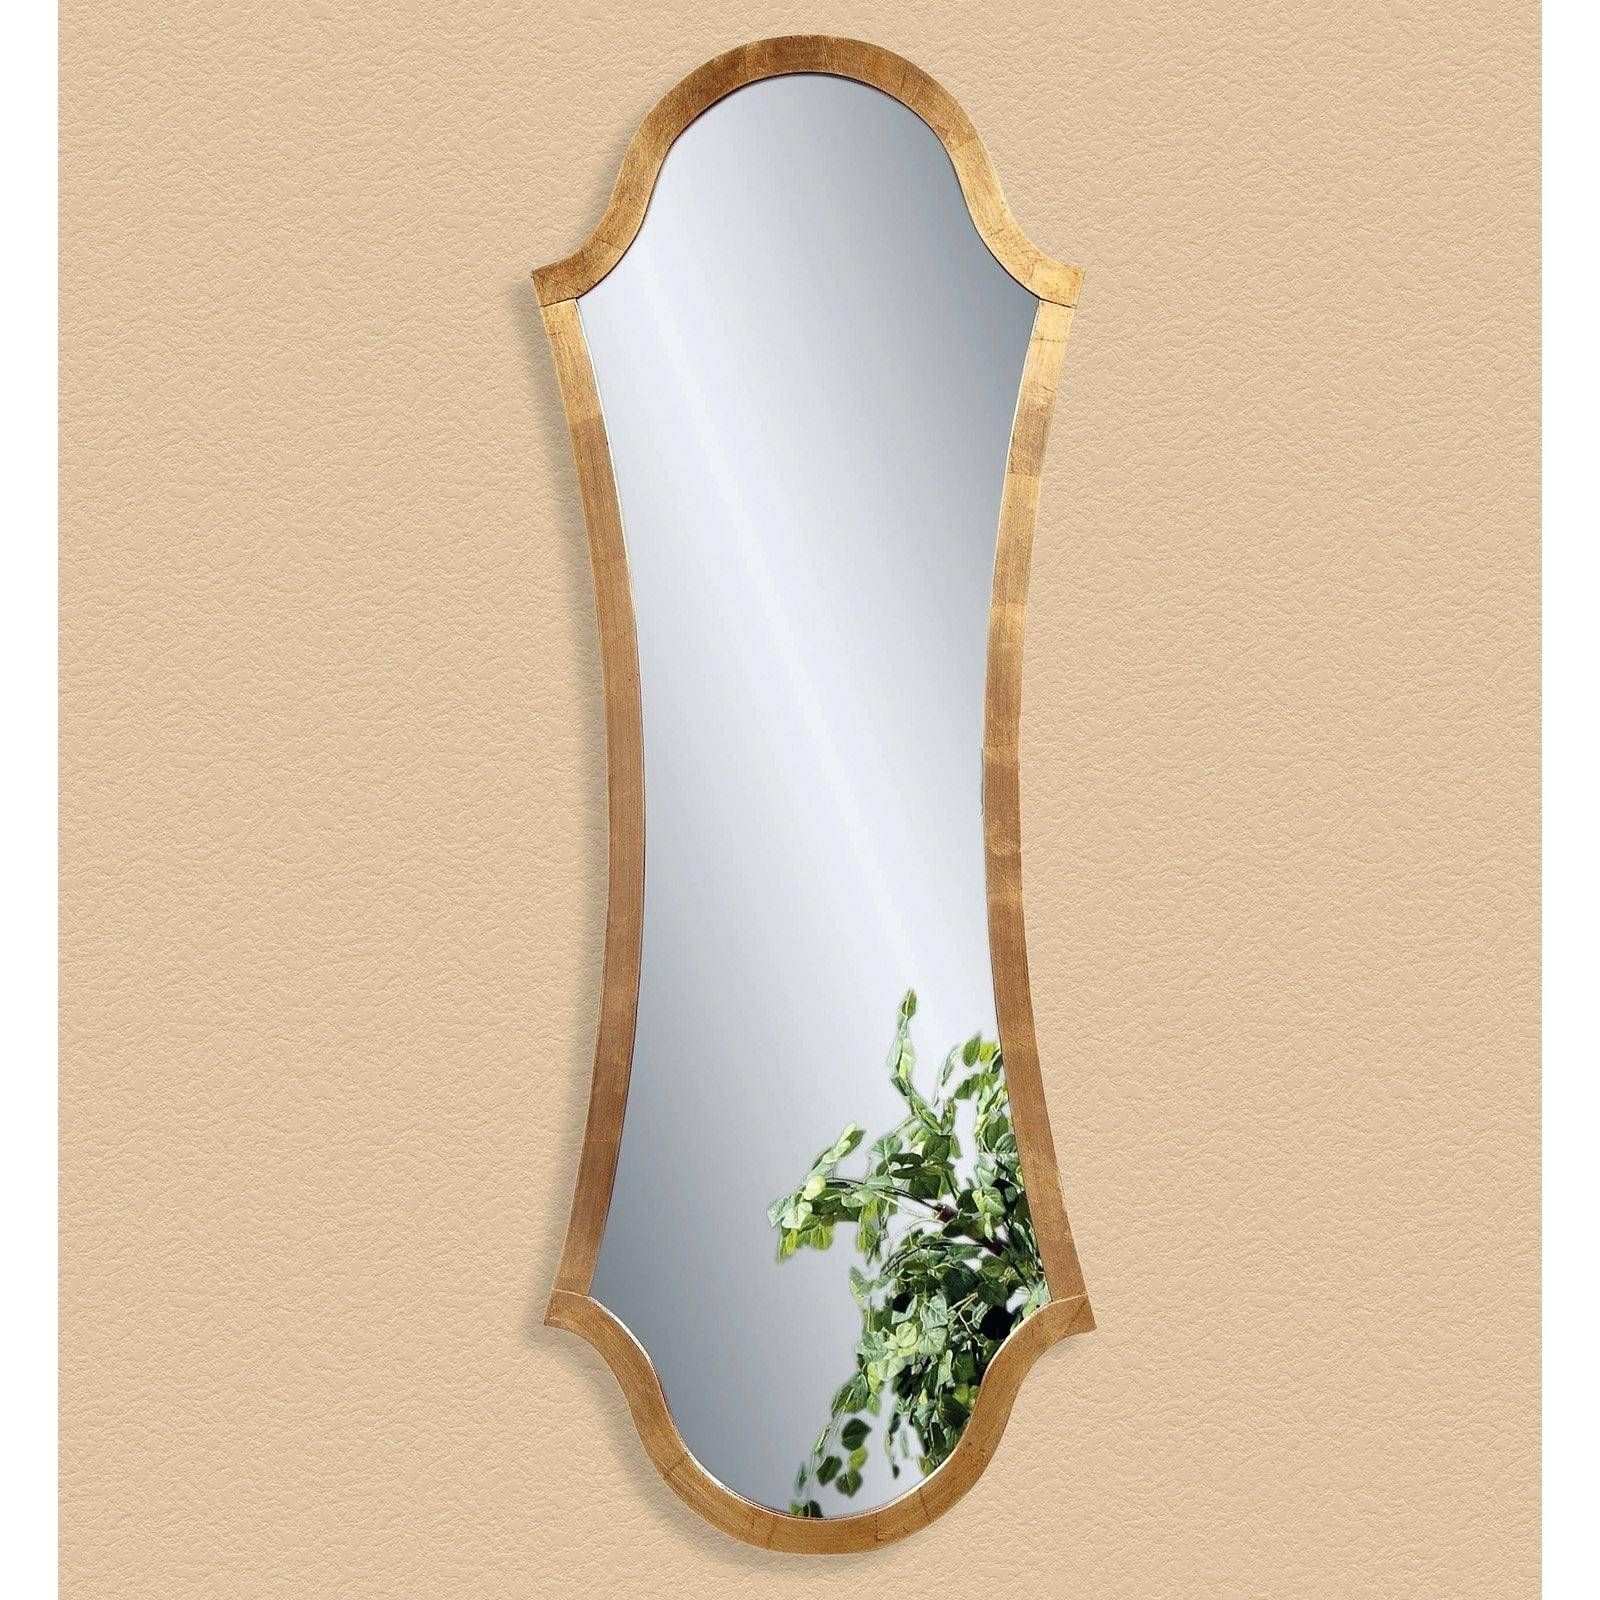 Decorative Full Length Mirror 2 Awesome Exterior With Full Length Intended For Full Length Decorative Mirrors (View 12 of 25)